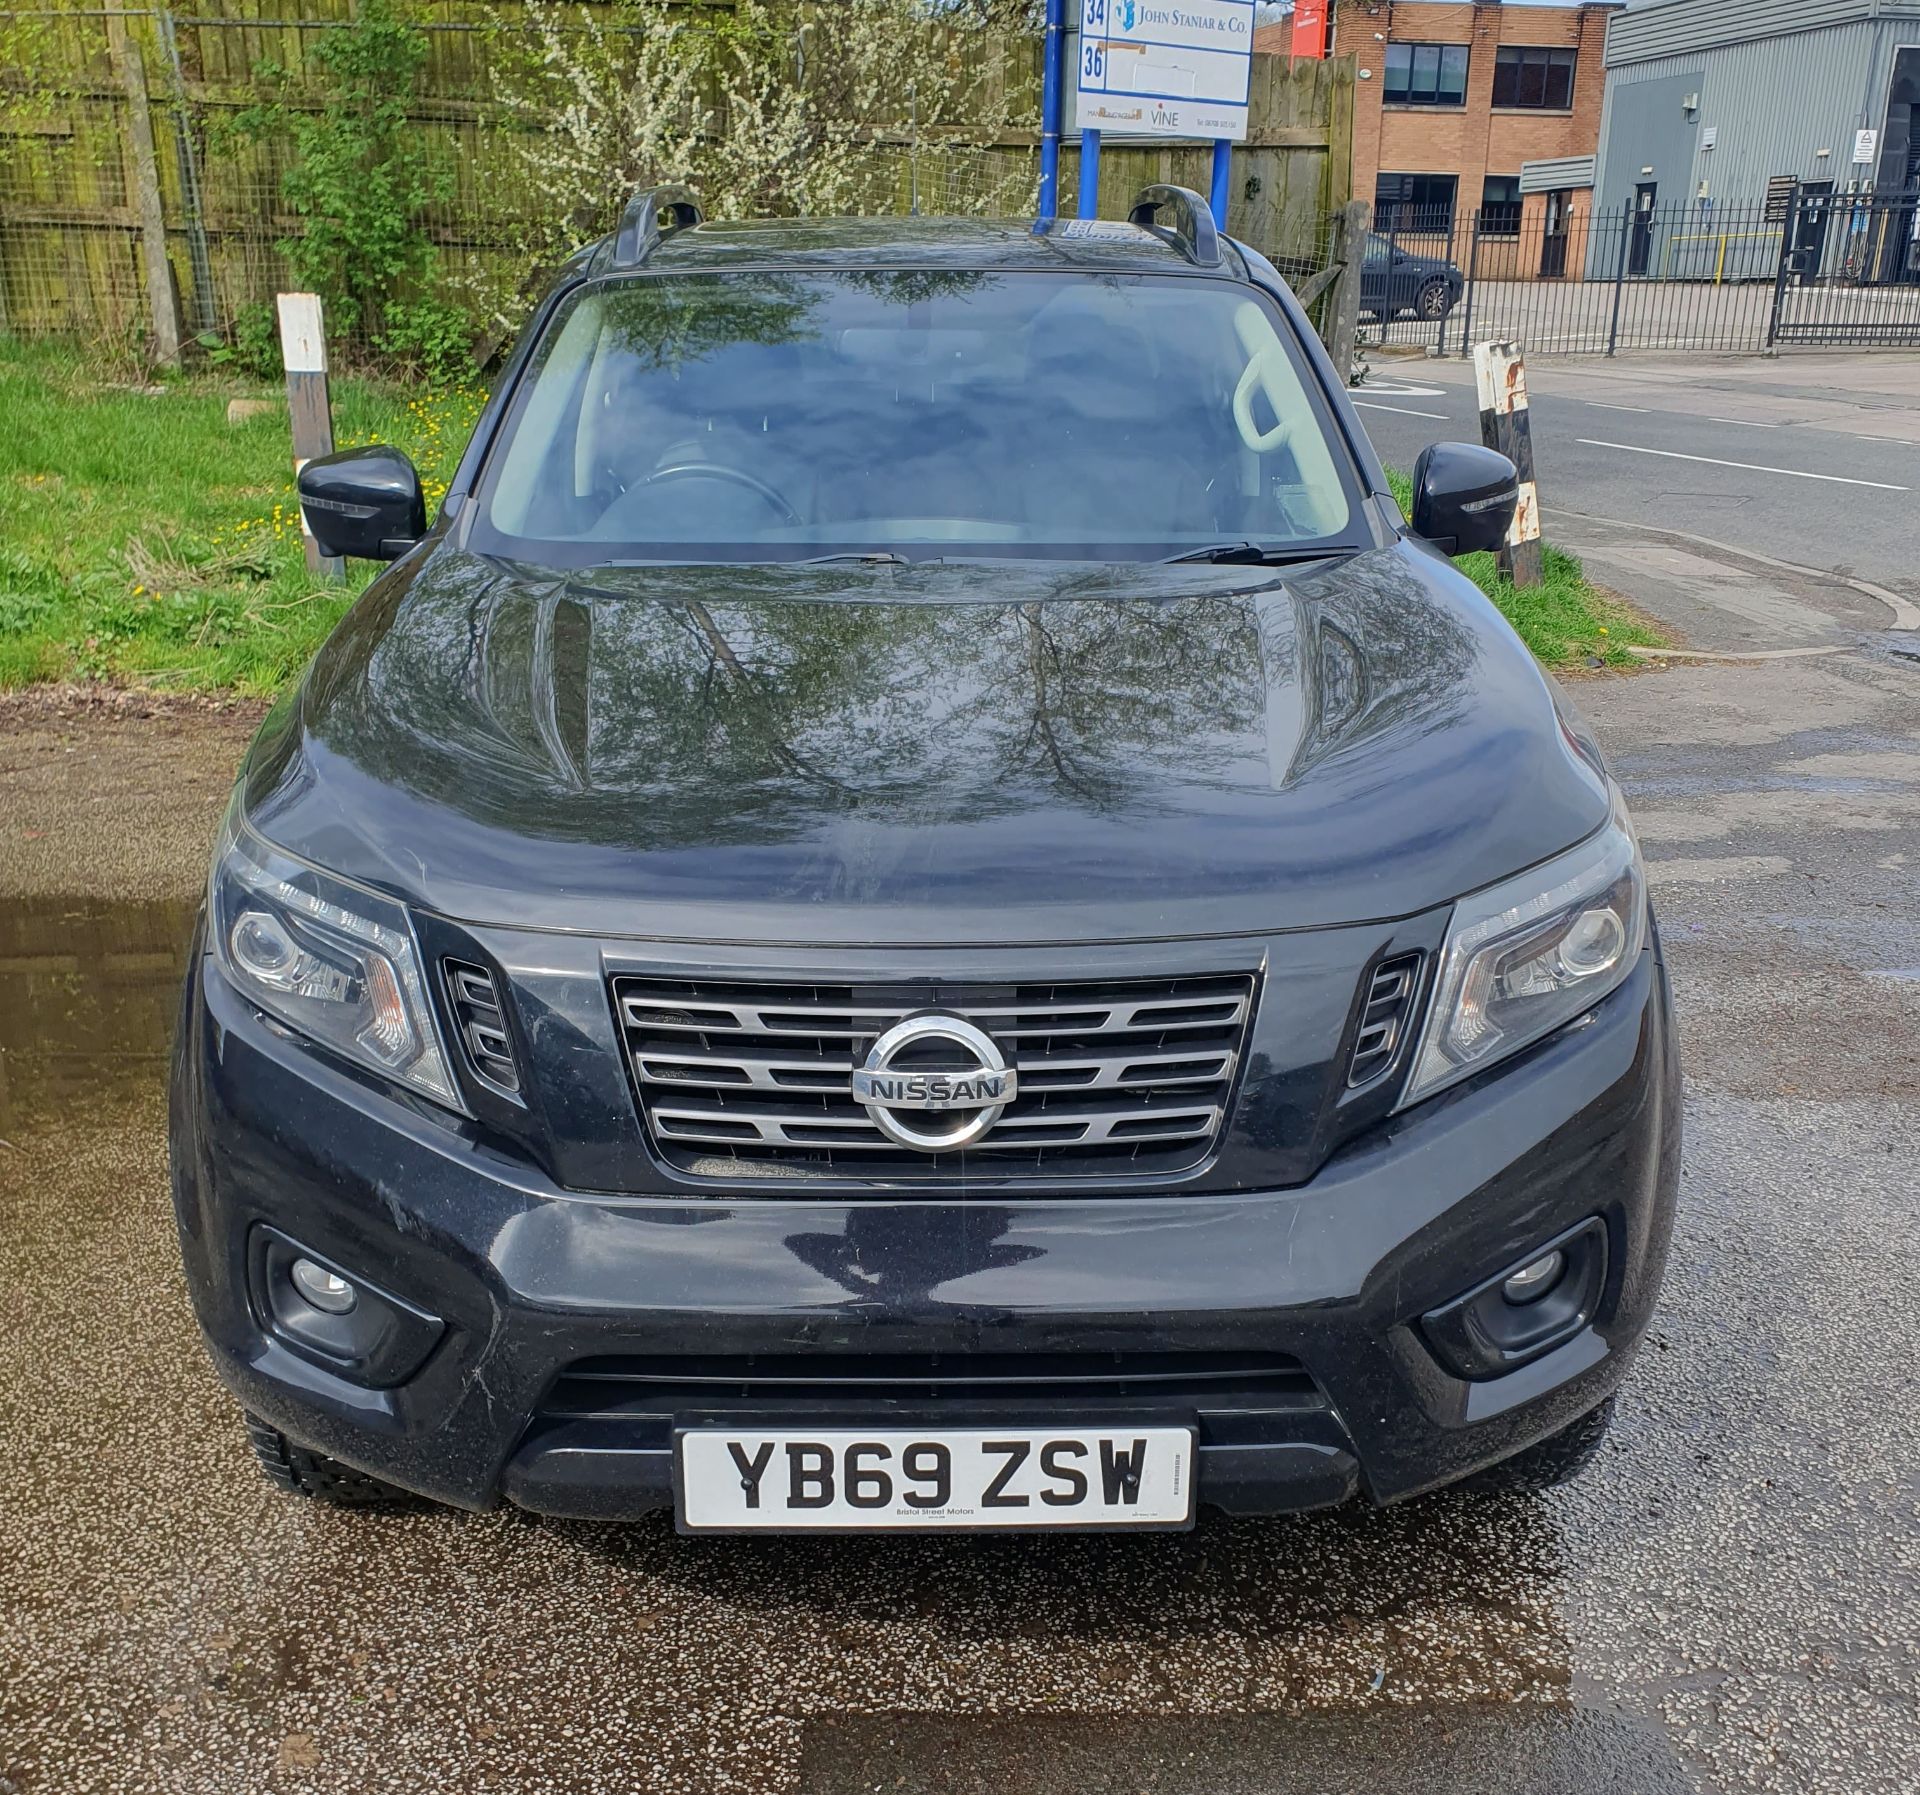 Nissan Navara N-guard DCI Auto | YB69 ZSW | Black | Automatic | 29,409 Miles | VAT APPLICABLE - Image 2 of 25